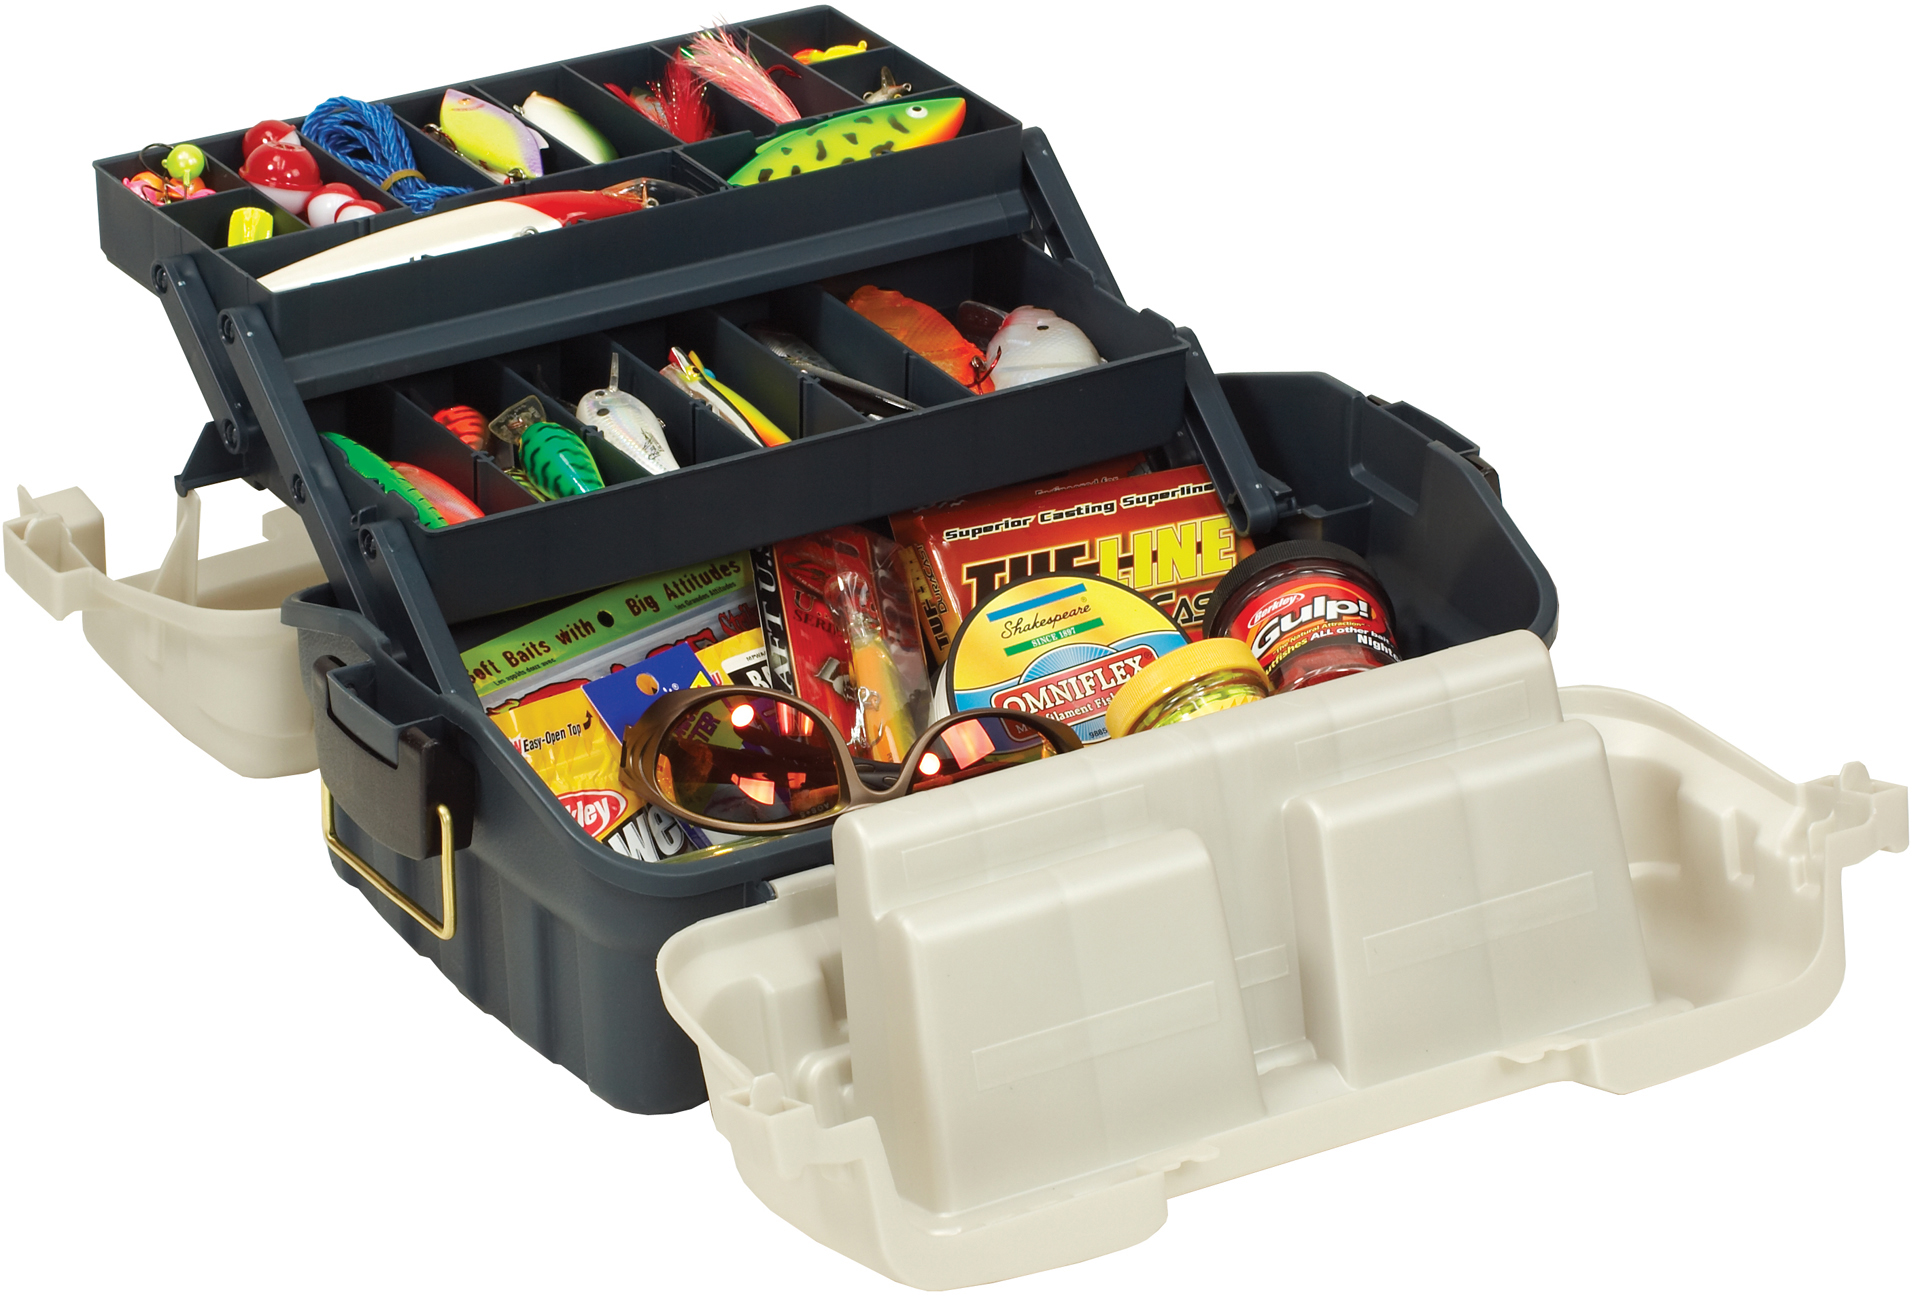 Plano Flipsider 2 Tray Box  $1.30 Off Free Shipping over $49!